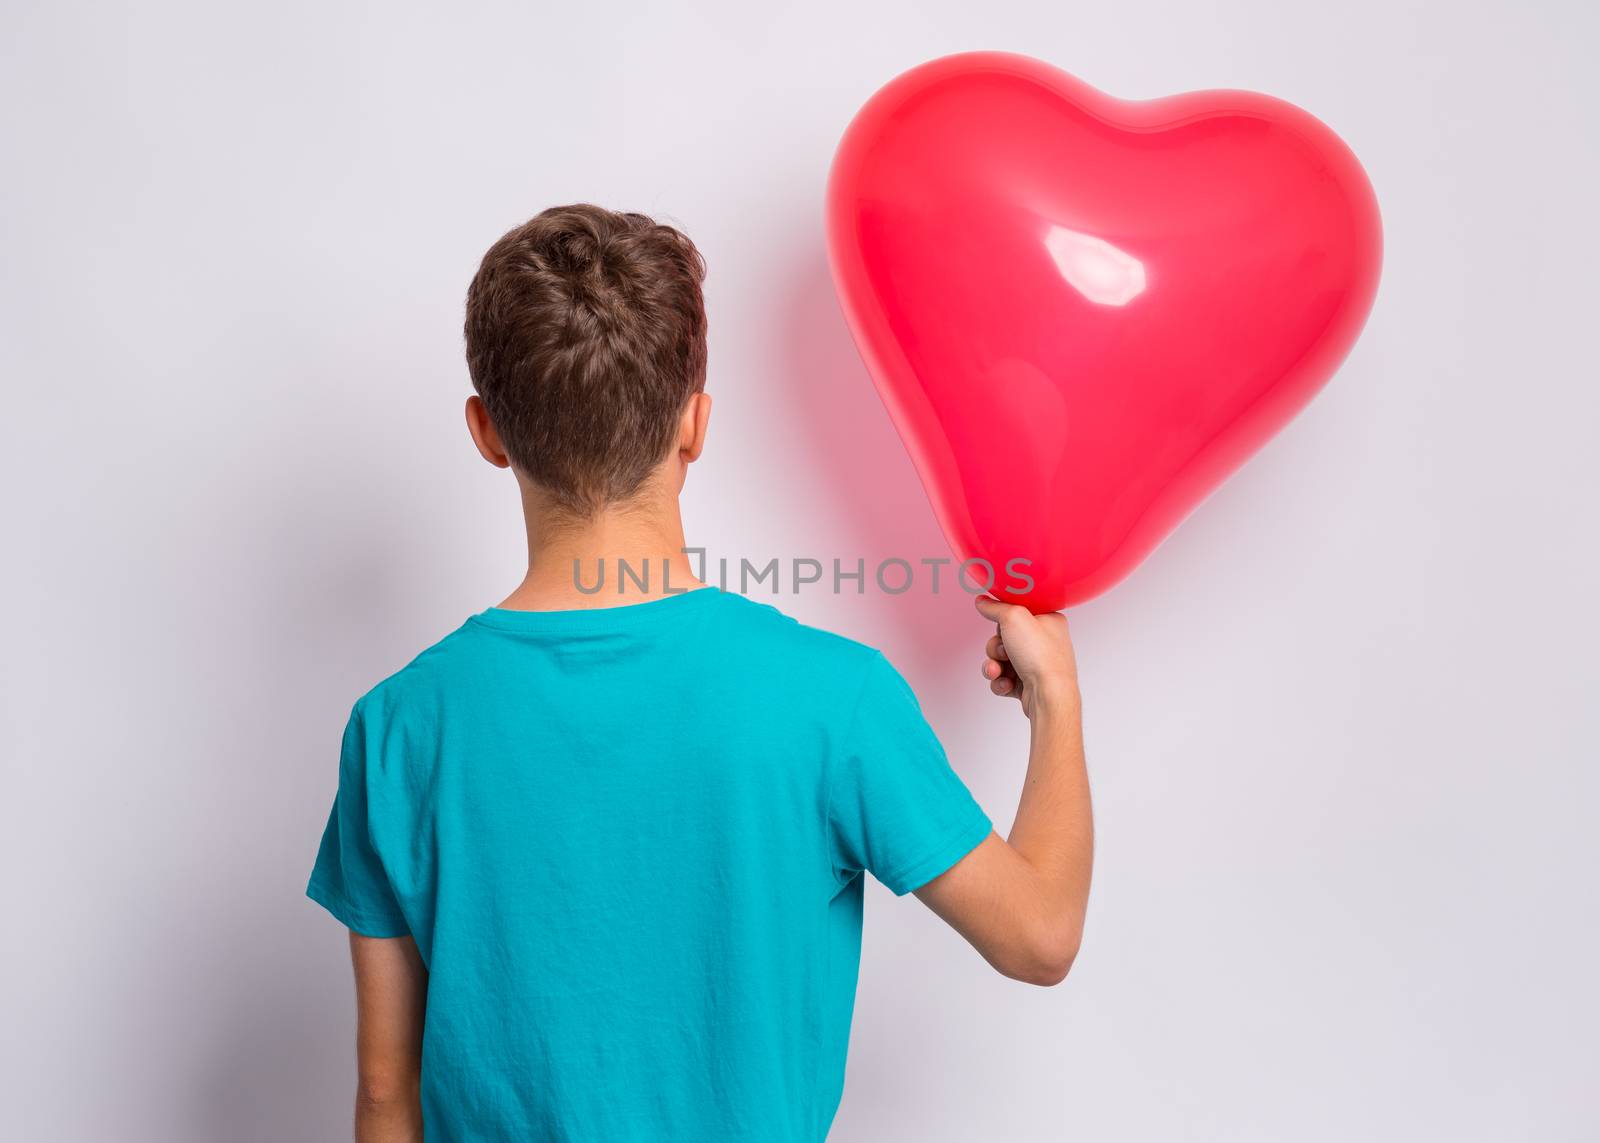 Boy with heart shaped balloon by fotostok_pdv